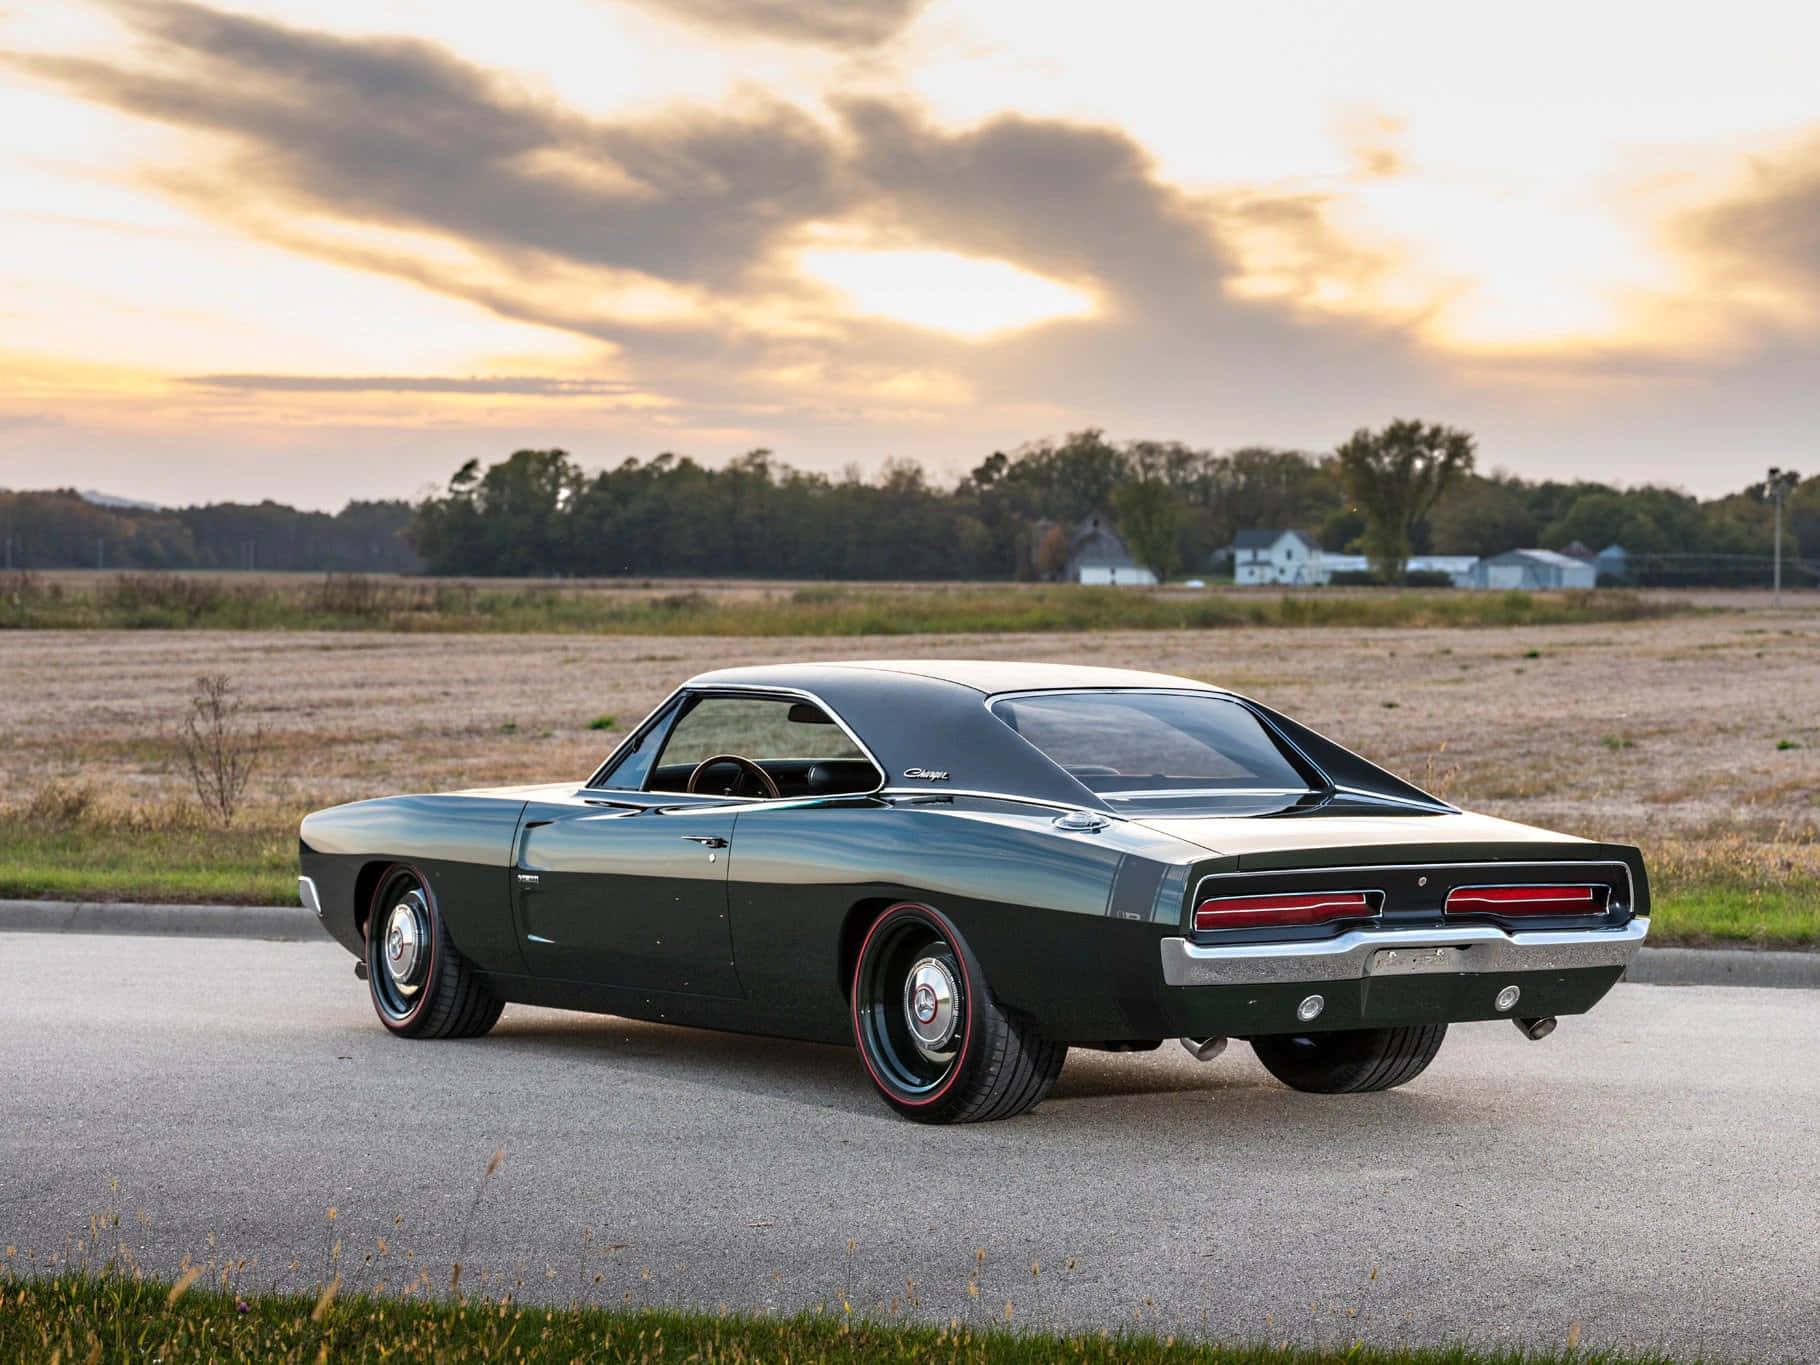 Blue Muscle Car - 1969 Dodge Charger